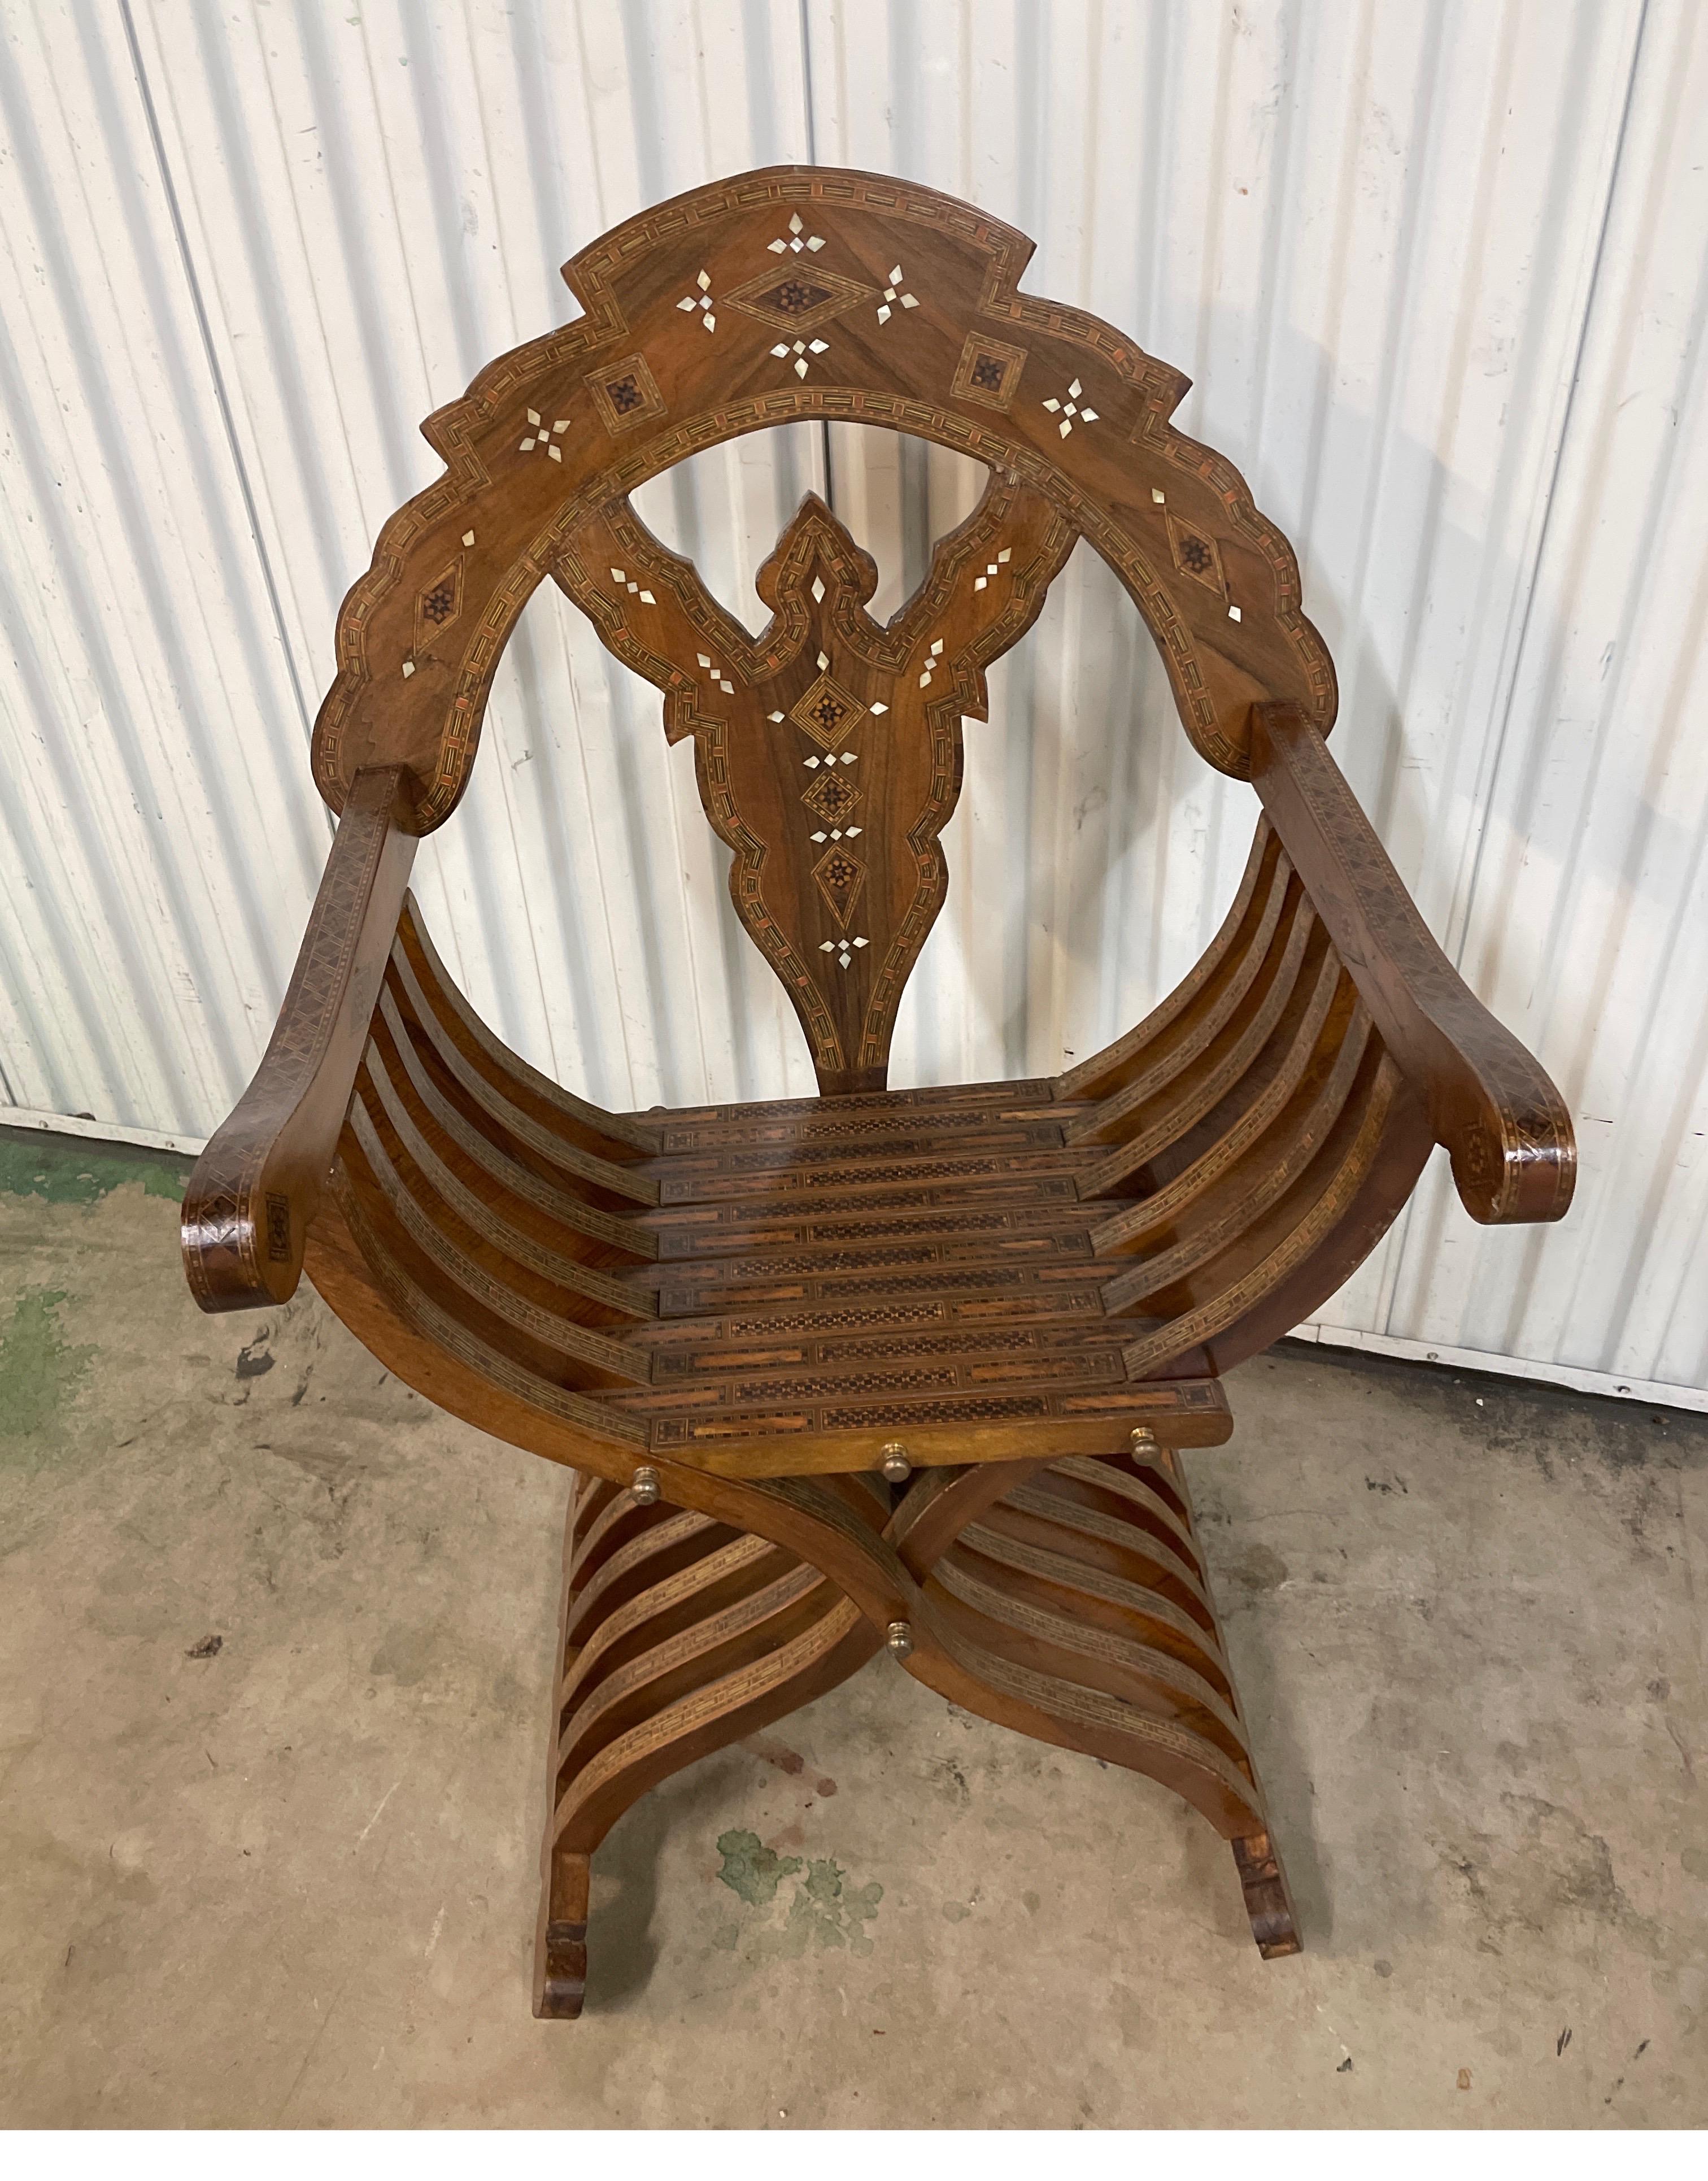 Vintage Mother of Pearl & inlaid wood Middle Eastern arm chair.